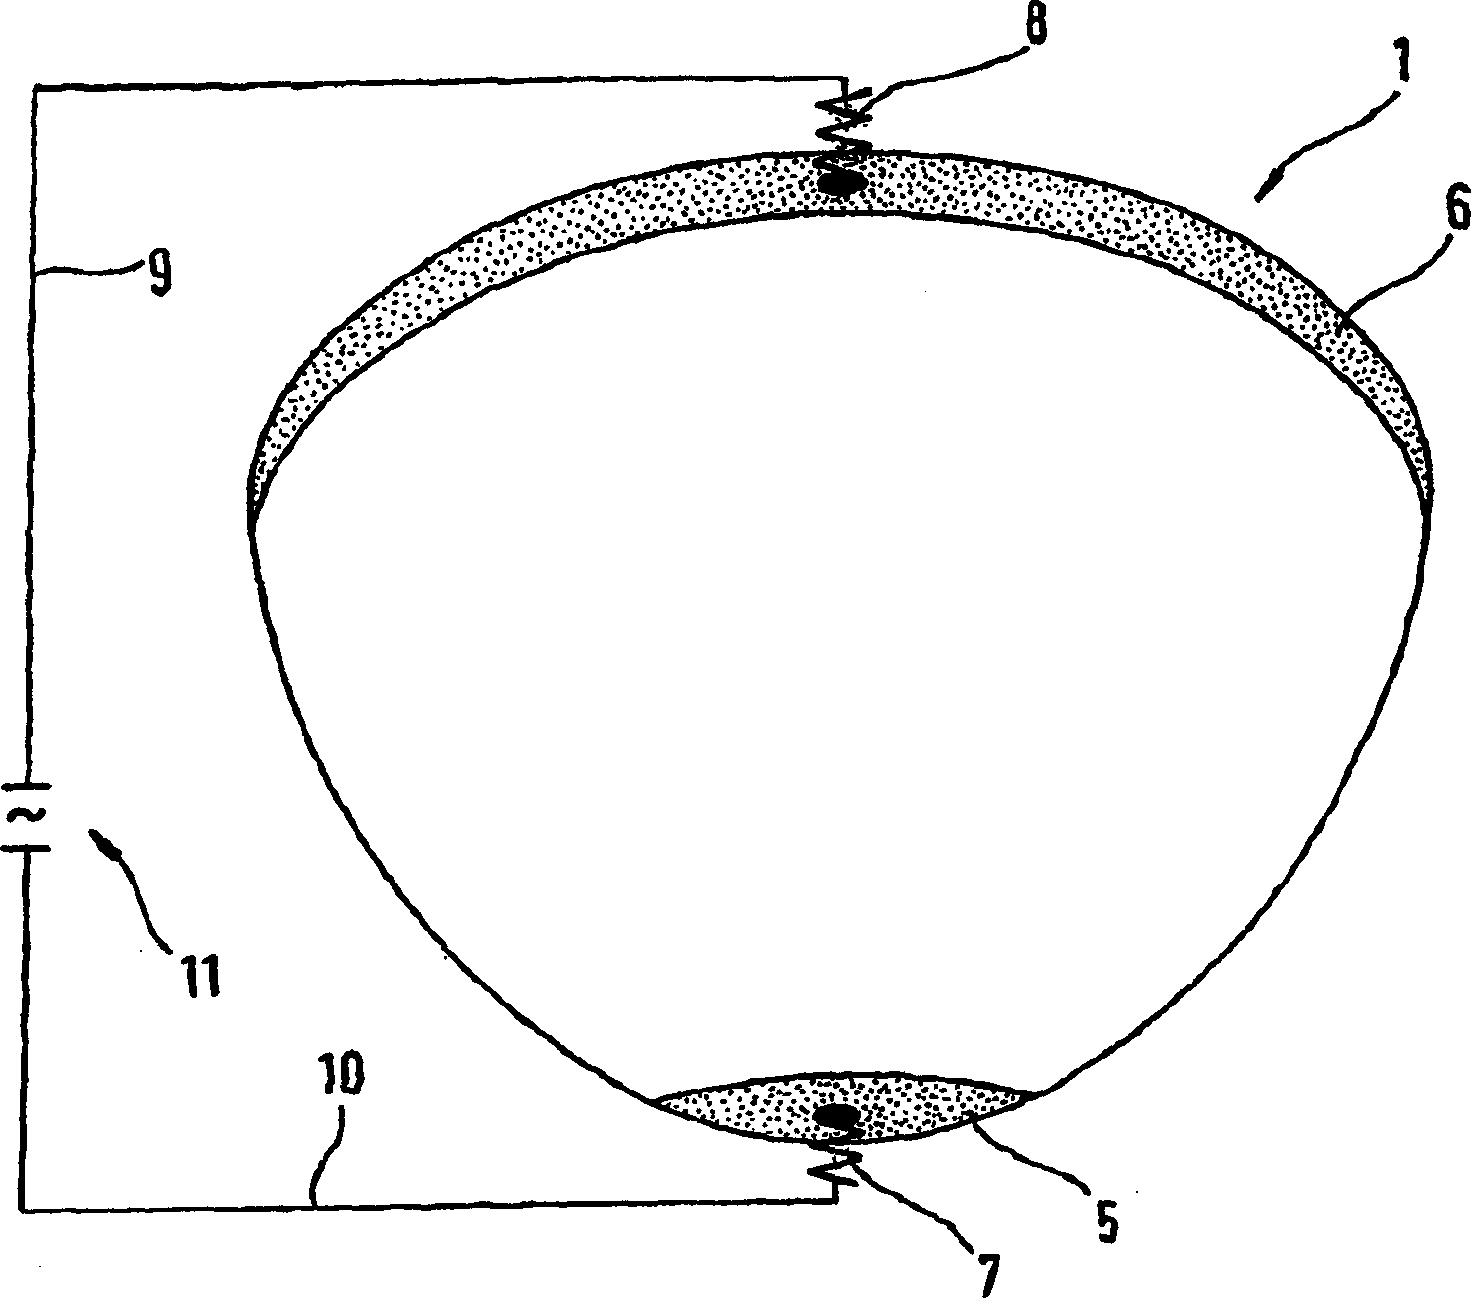 Cooking device comprising non-planar, multi-dimensionally configured cooking surface composed of glass or glass ceramic